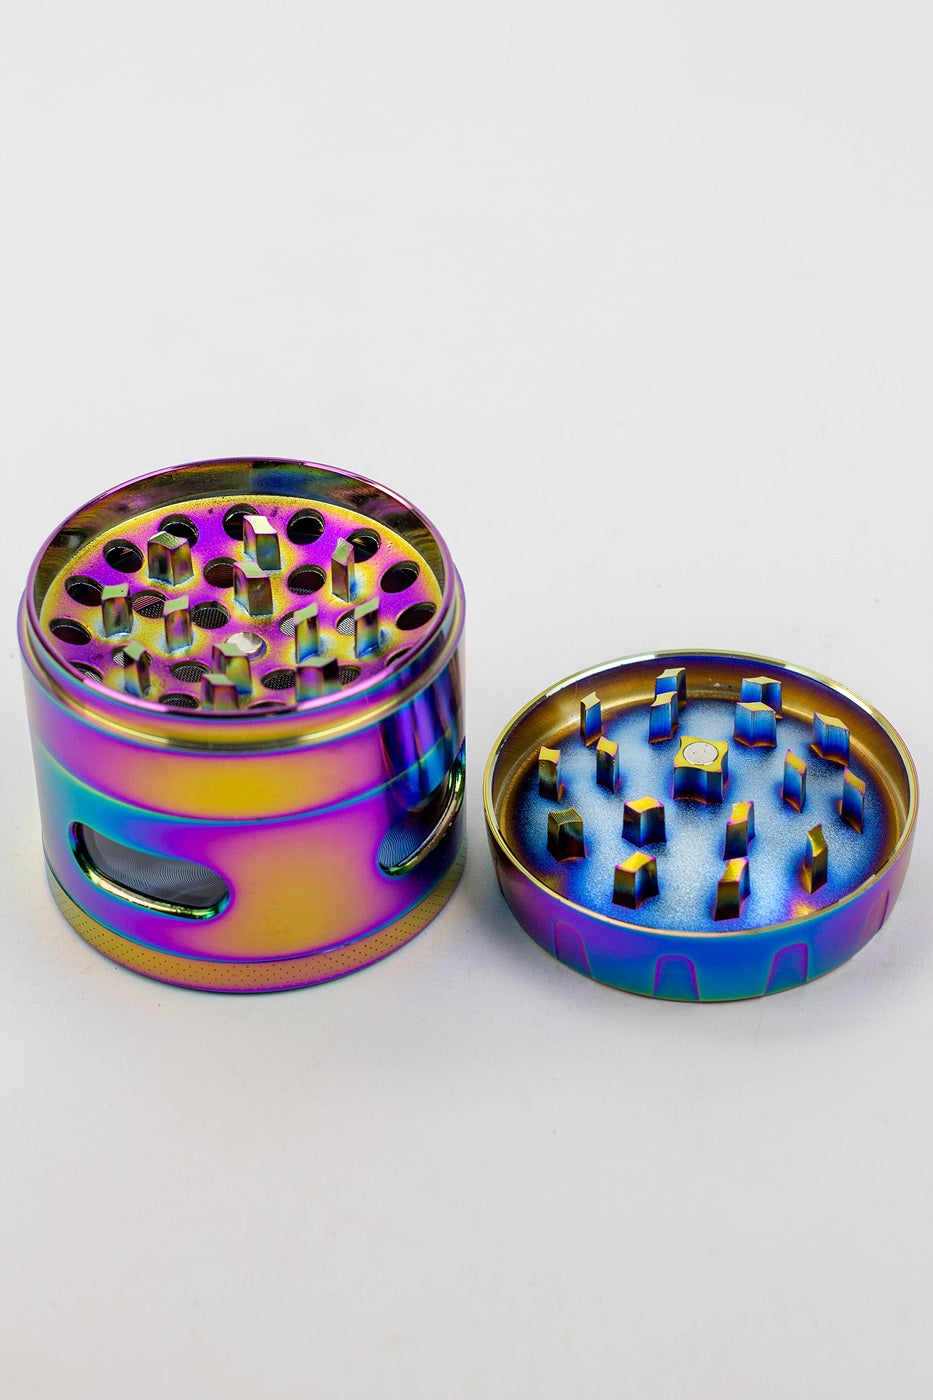 SPARK 4 Parts grinder with side window Smoke Drop 